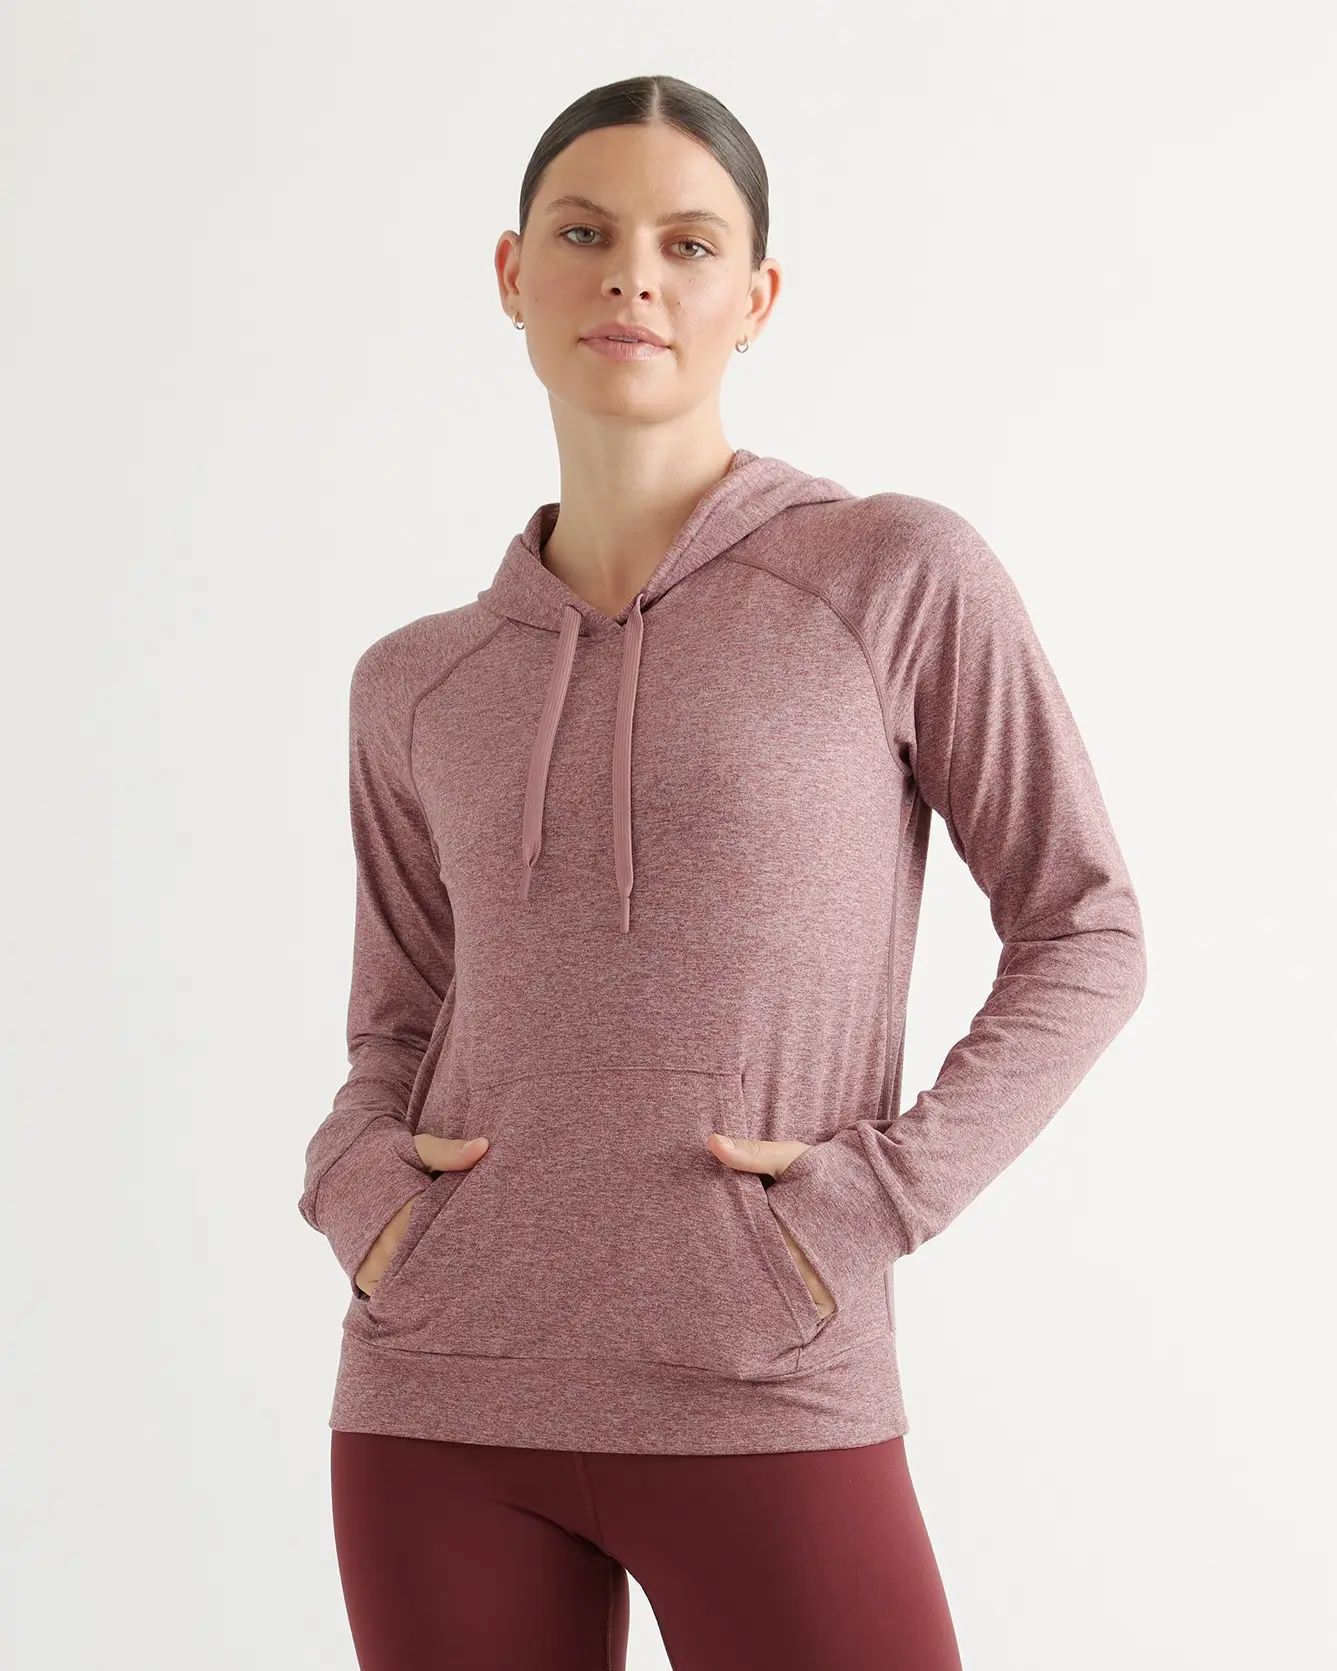 Flowknit Ultra-Soft Performance Pullover Hoodie | Quince